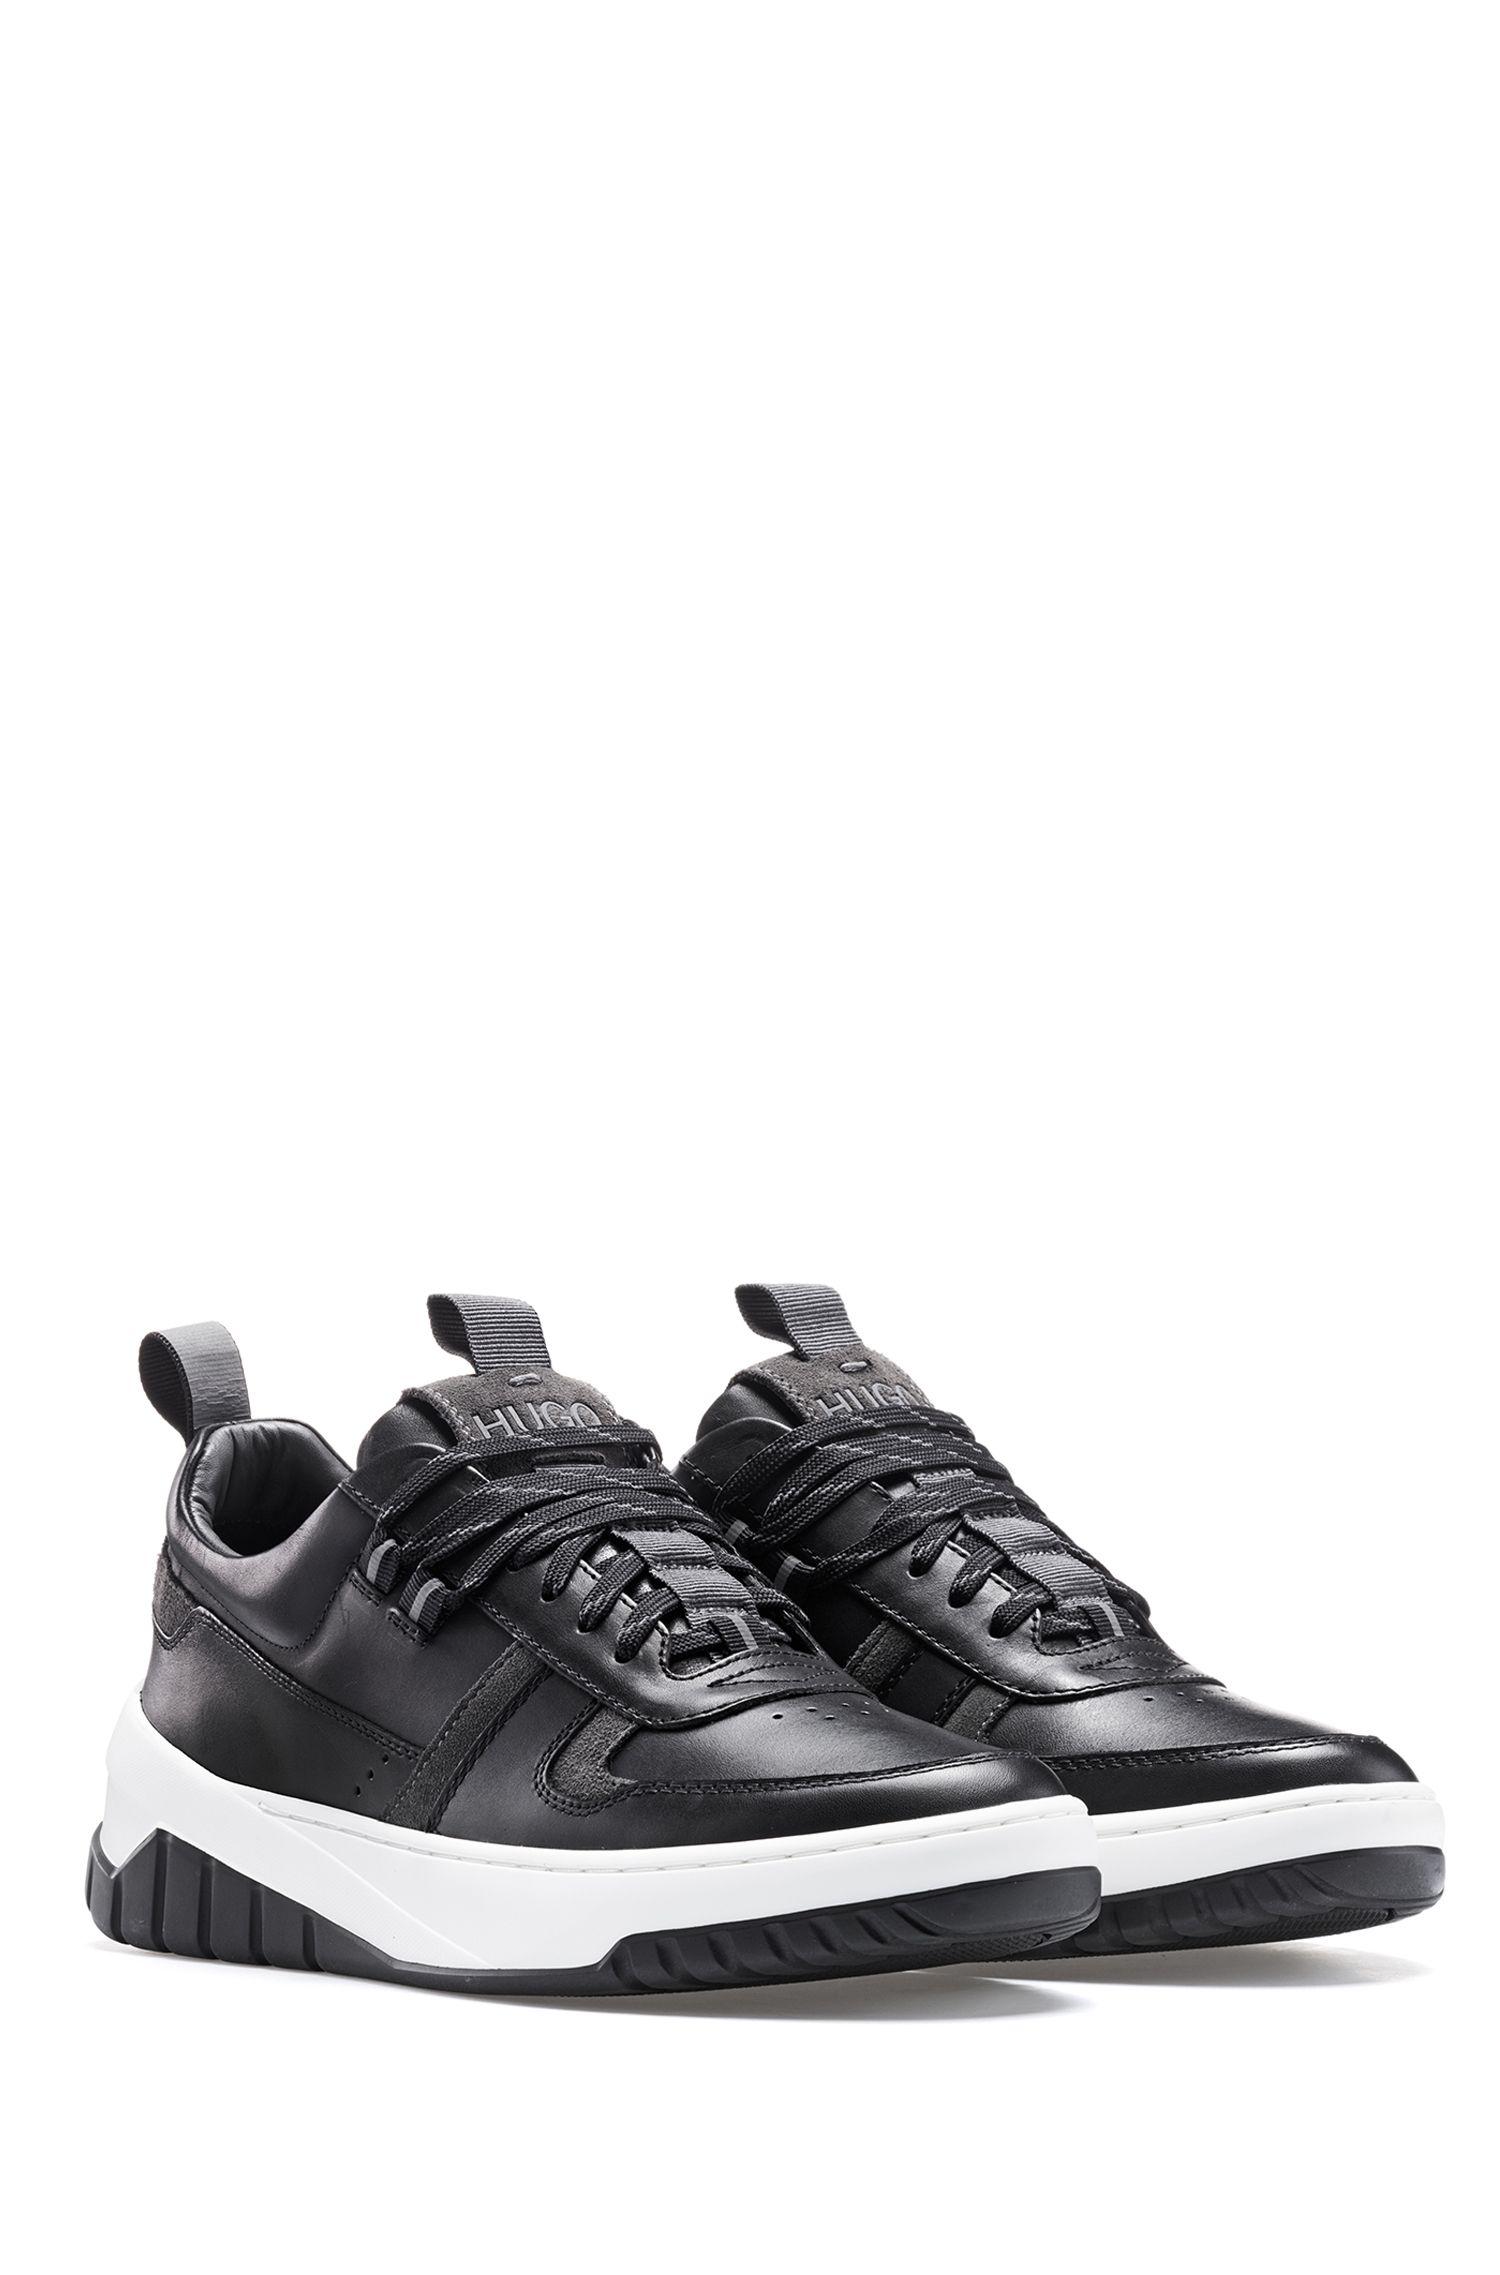 BOSS by Hugo Boss Tennis Inspired Trainers In Nappa Leather And Suede ...